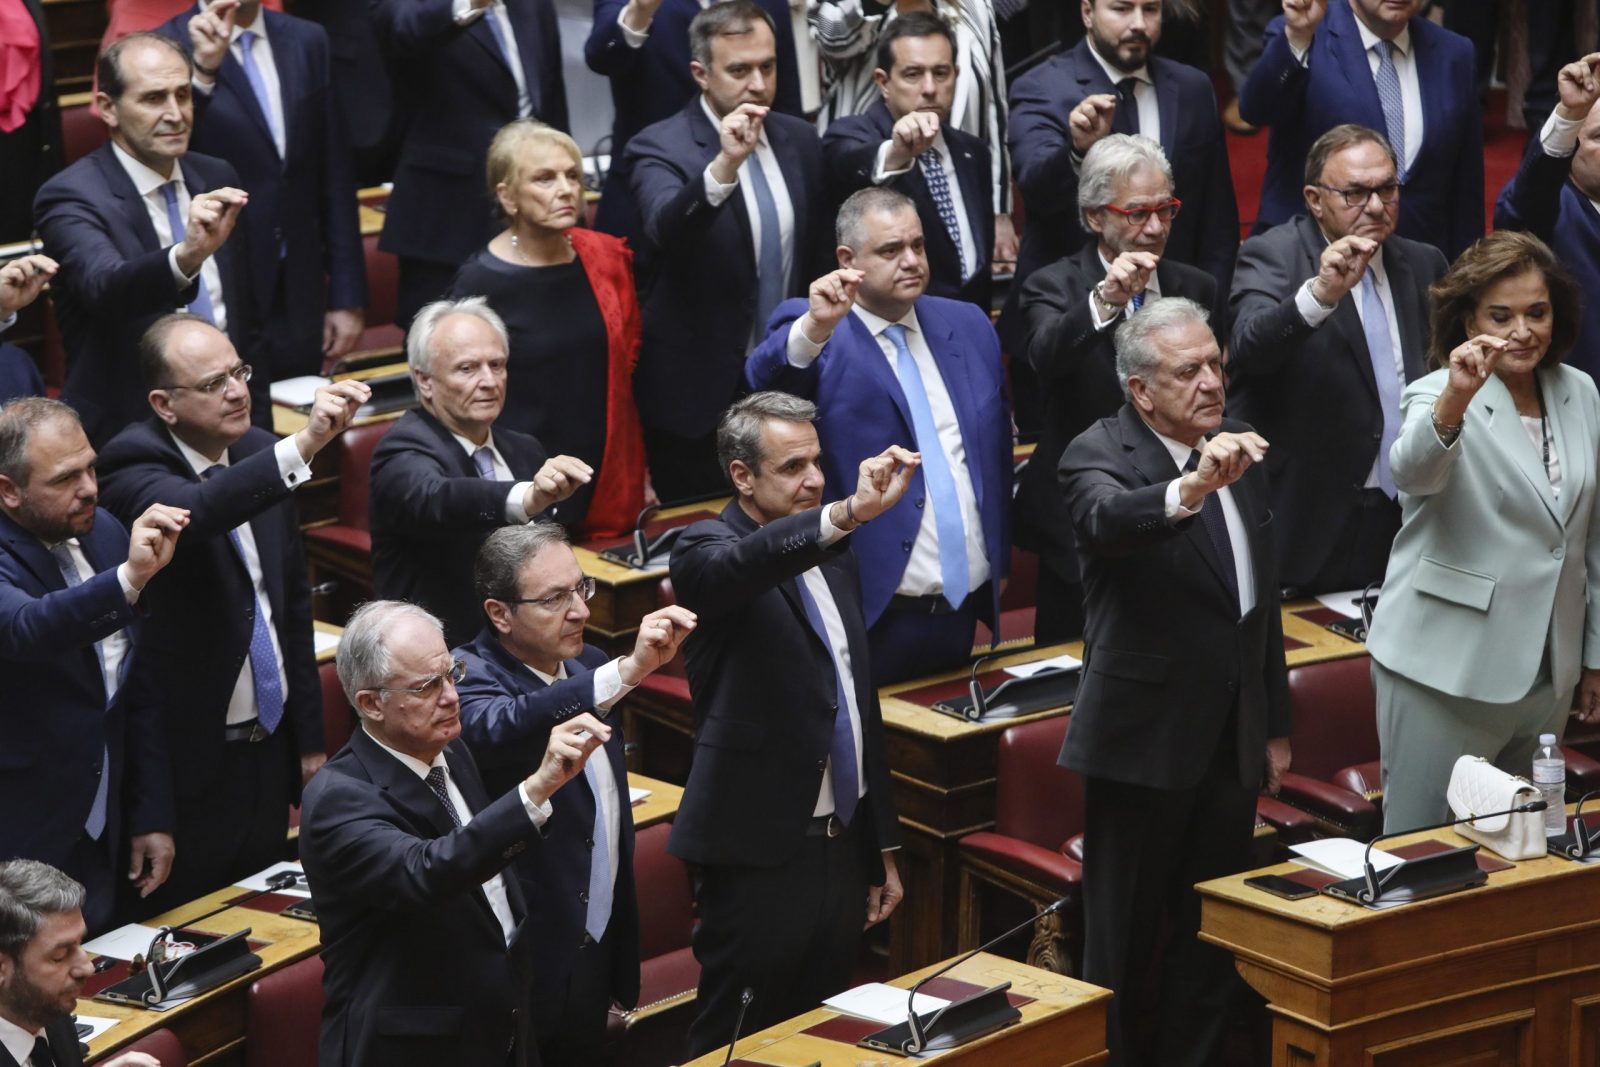 epa10660540 New Democracy party leader Kyriakos Mitsotakis (3-R) and newly-elected lawmakers attend a swearing-in ceremony at the Greek Parliament, in Athens, Greece, on 28 May 2023. Party members who won seats in Parliament in the 21 May national elections are sworn in during a ceremony attended by the Greek President Katerina Sakellaropoulou. The Parliament is expected to dissolve on 29 May, followed by an official announcement of runoff national elections to be held on 25 June.  EPA/GEORGE VITSARAS